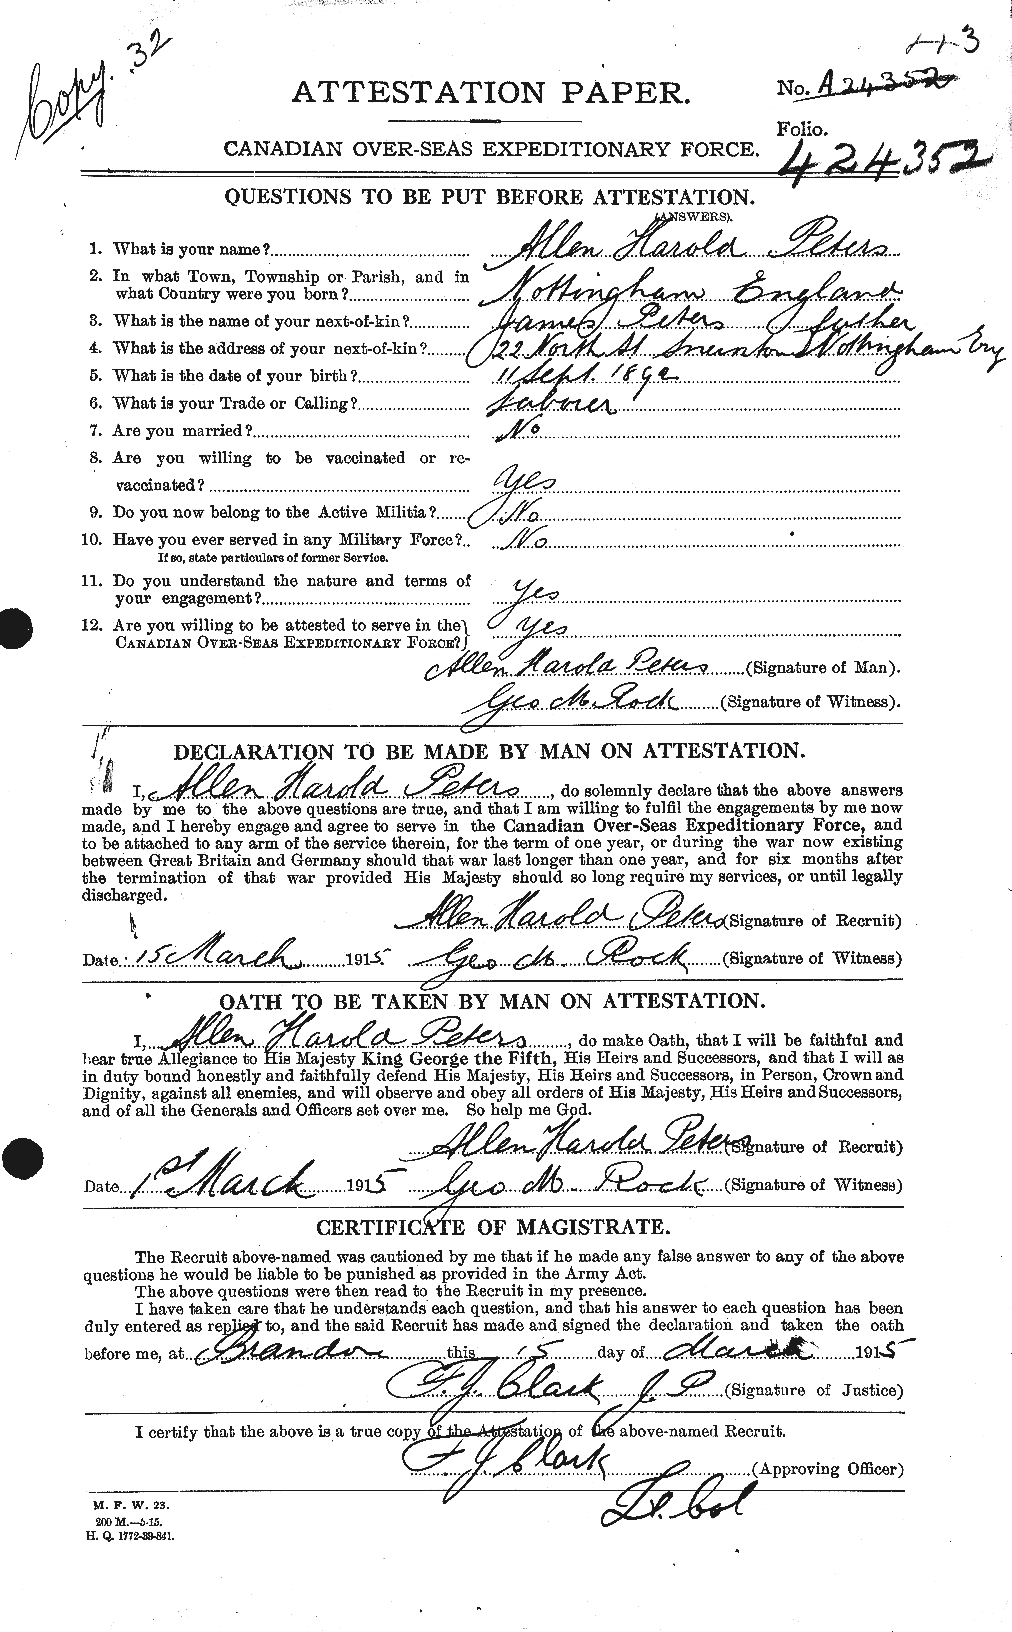 Personnel Records of the First World War - CEF 575343a